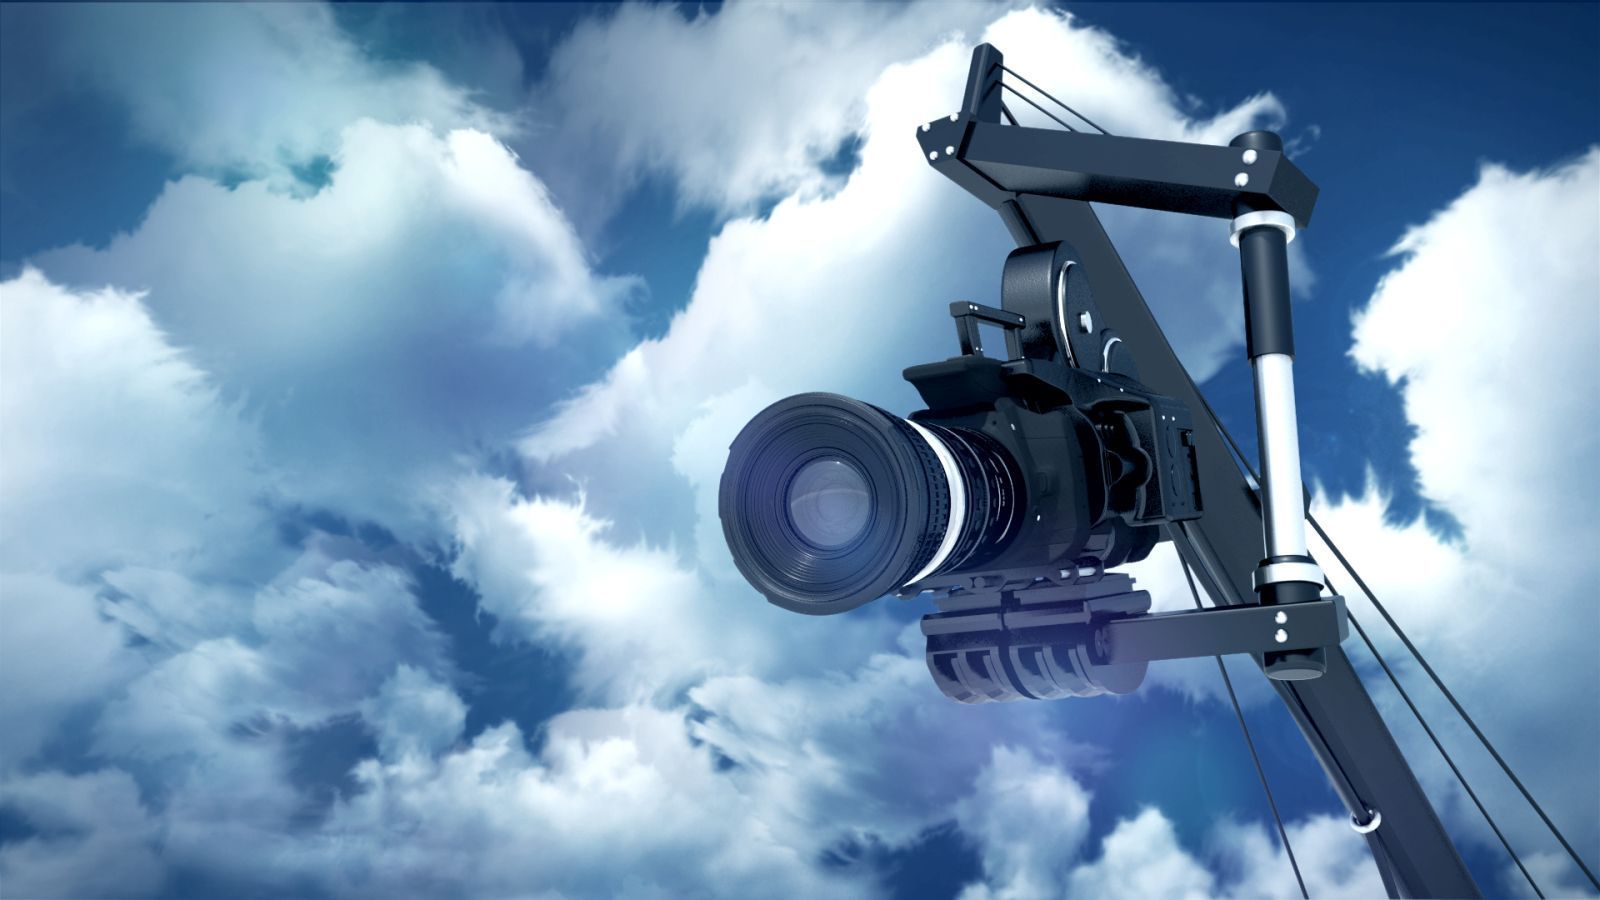 Crane Camera Lens Intro - After Effects Project Files | VideoHive